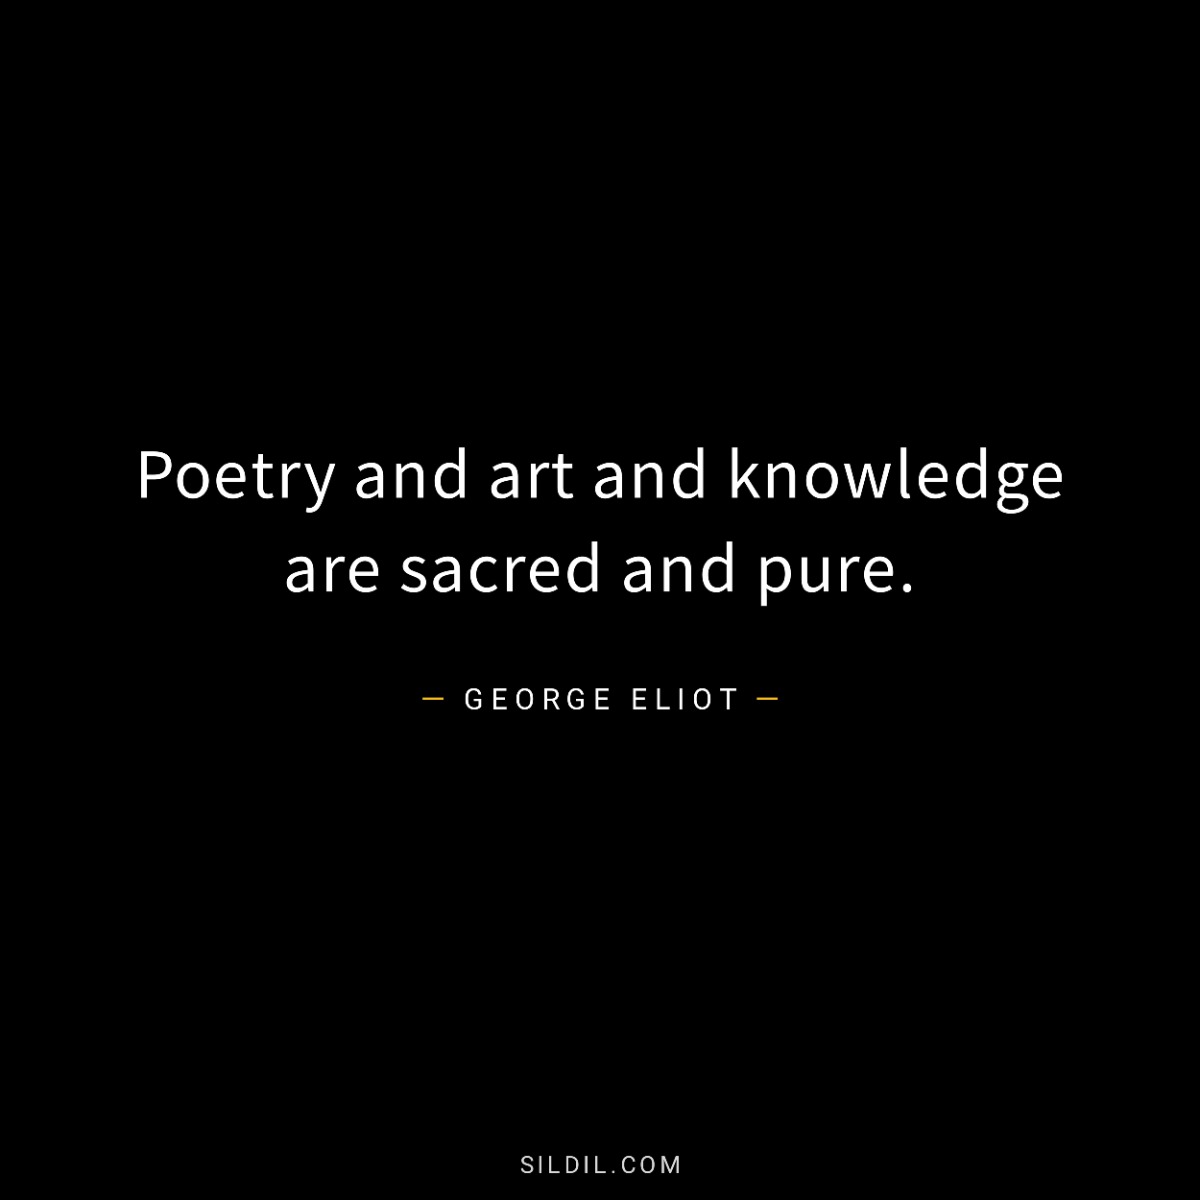 Poetry and art and knowledge are sacred and pure.